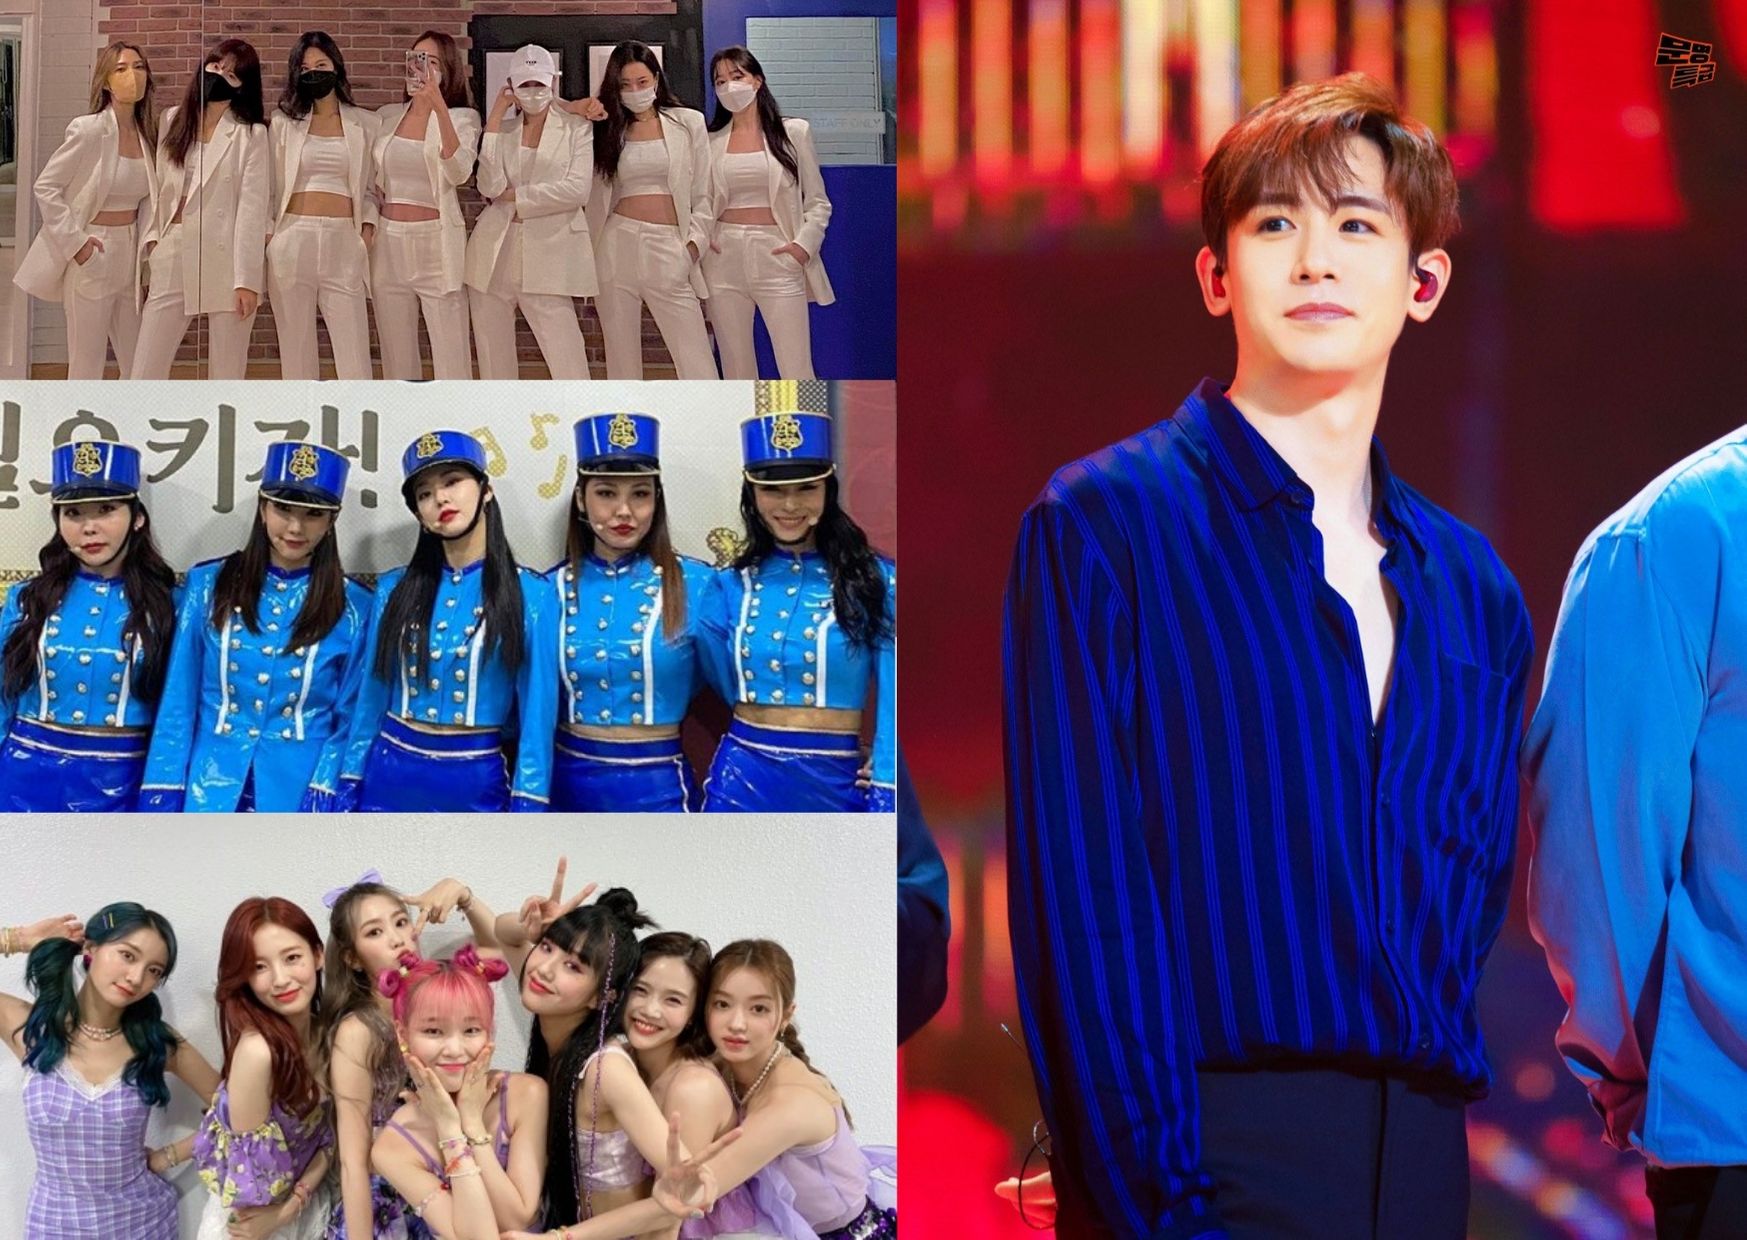 The special concert was titled “Quality Bops That Are So Good We Wouldn’t Mind If You Made Another Comeback With Them,” with a special lineup consisting of 2PM, 9Muses, After School, and more.